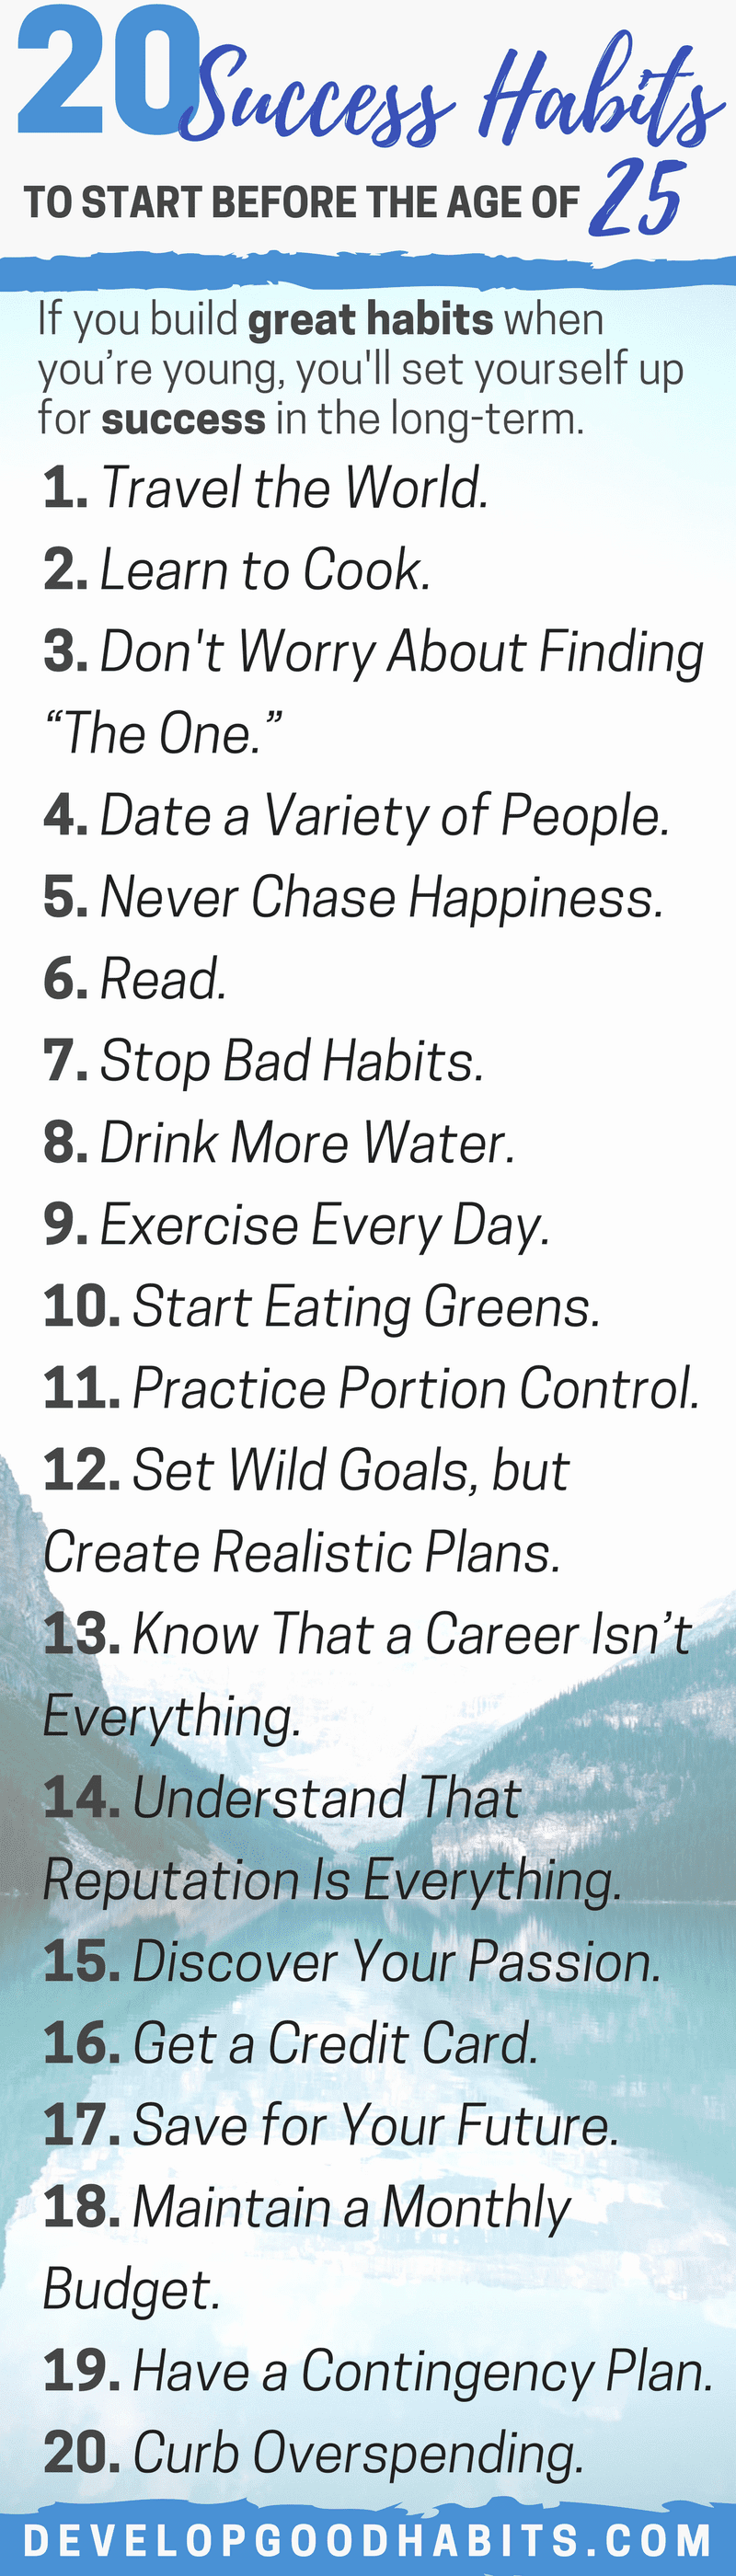 Daily Habits Highly Successful People Have | Habits of Successful People | Great Habits of the Most Successful People